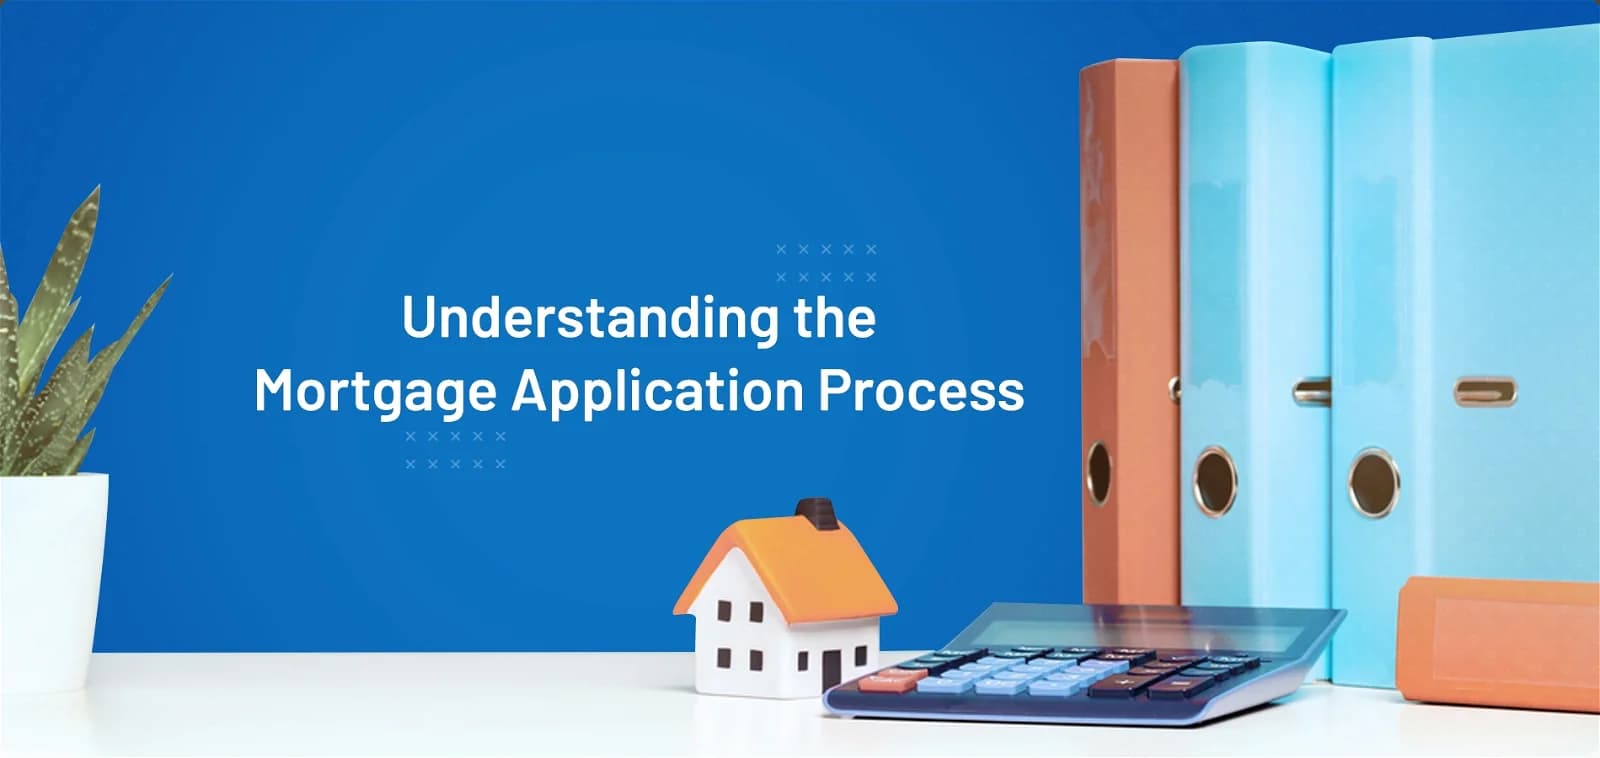 Understanding the Mortgage Application Process